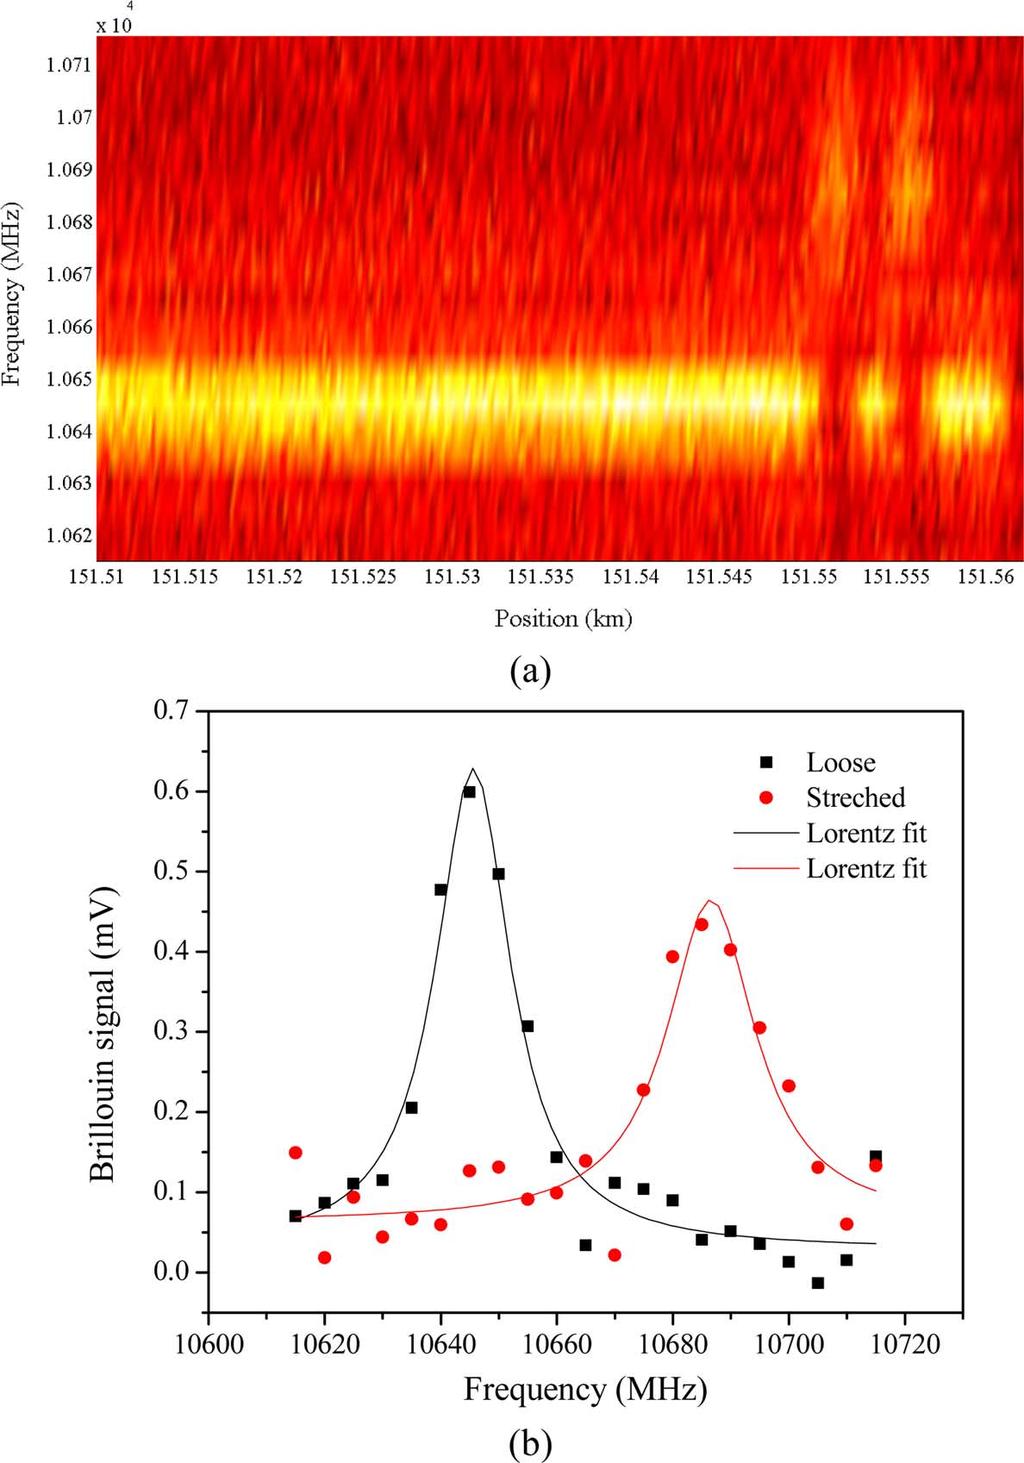 Measured Brillouin spectra in two spans at the positions of (a) 25 km, (b)50km,and(c)75km. obtained at the positions of 25 and 50 km in the span 1, respectively.